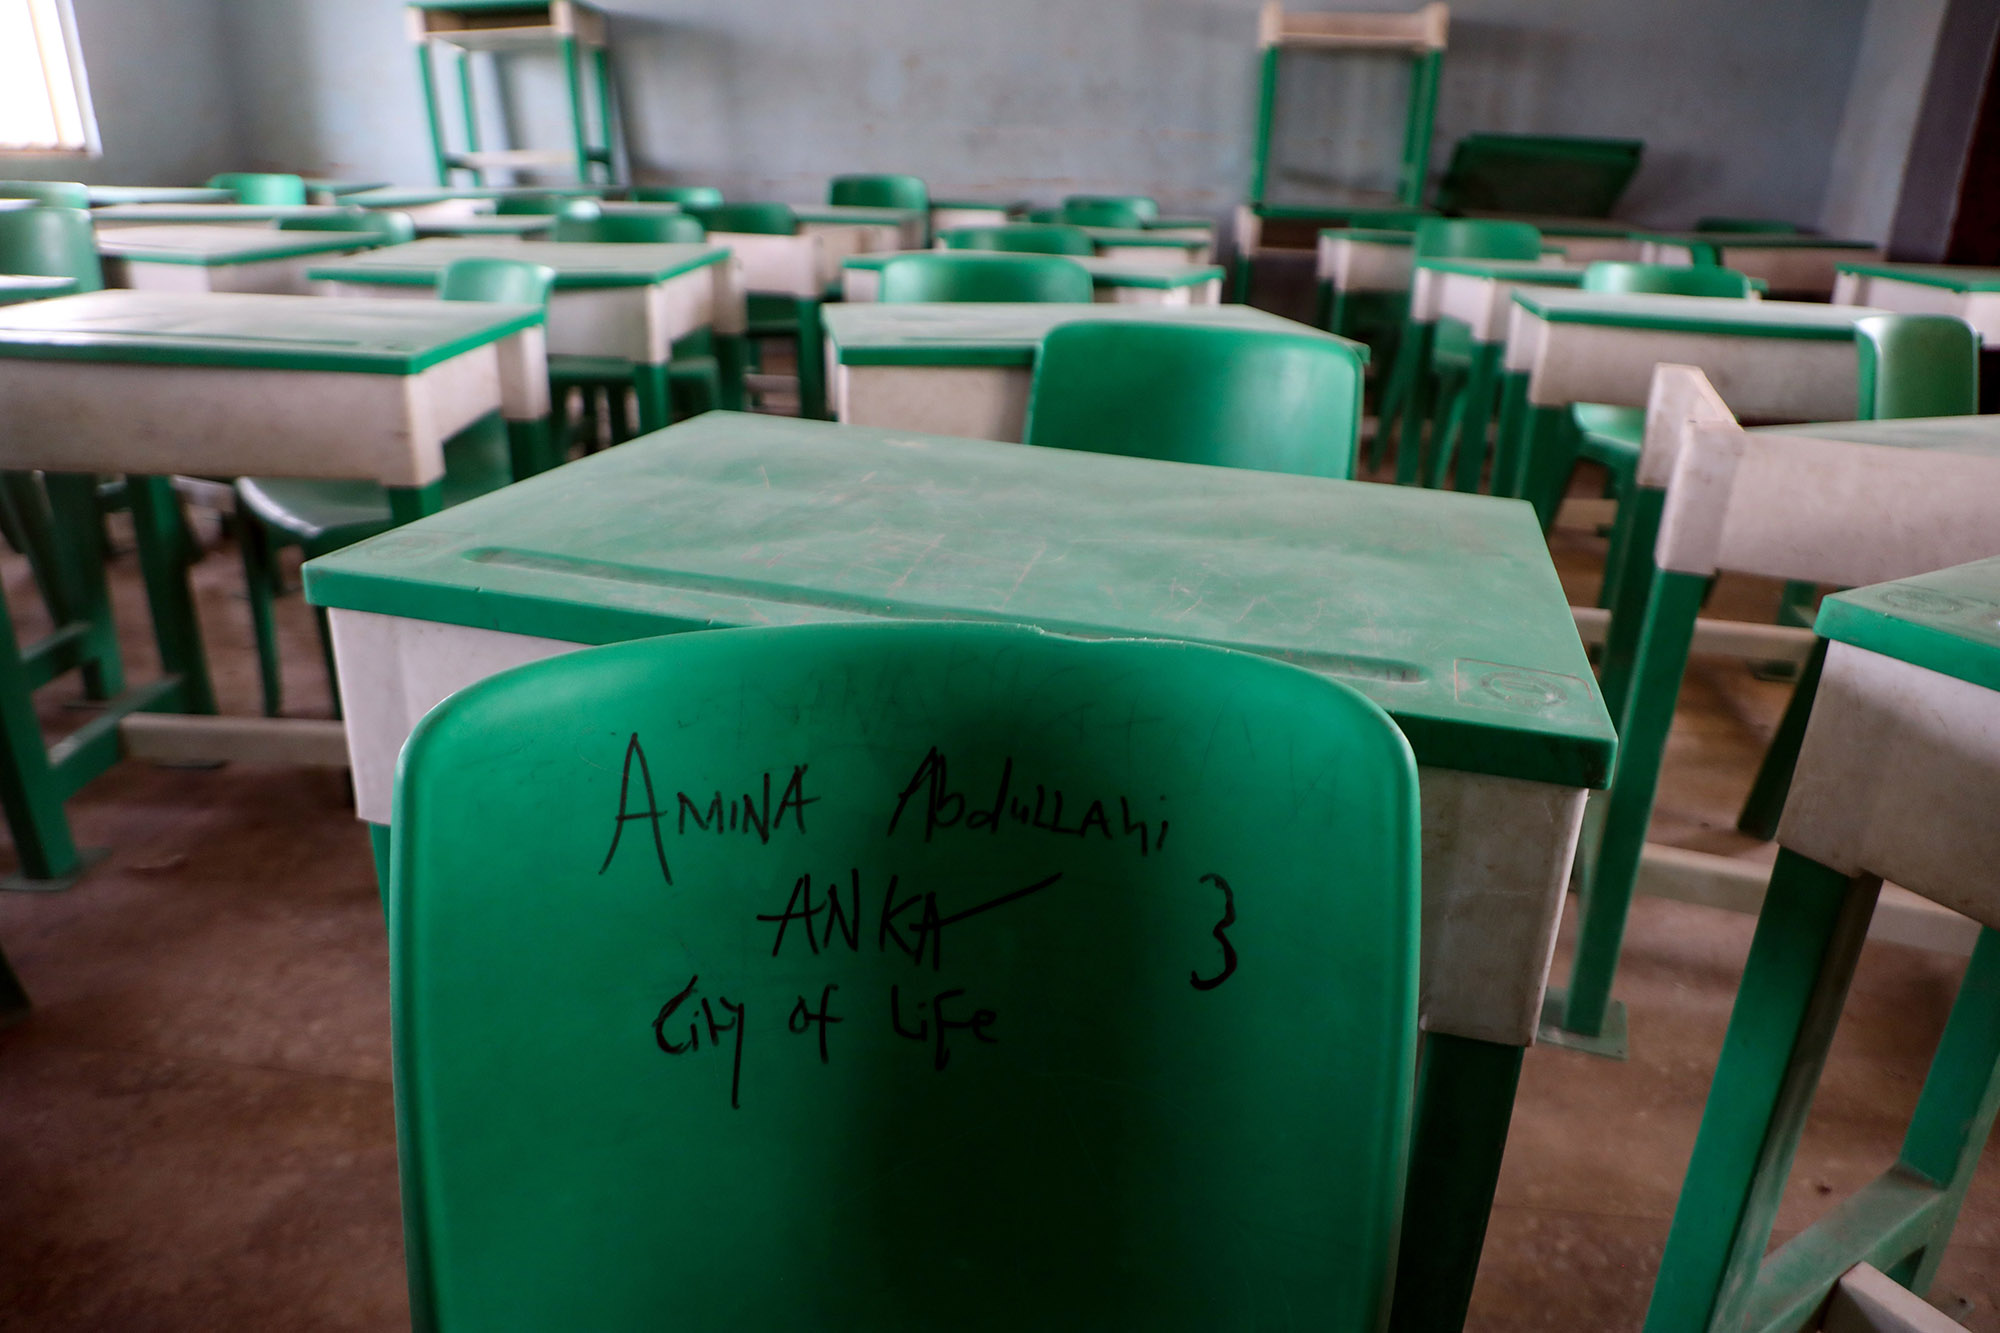 A deserted classroom at the Government Girls Secondary School, the day after the abduction of over 300 schoolgirls.&nbsp;